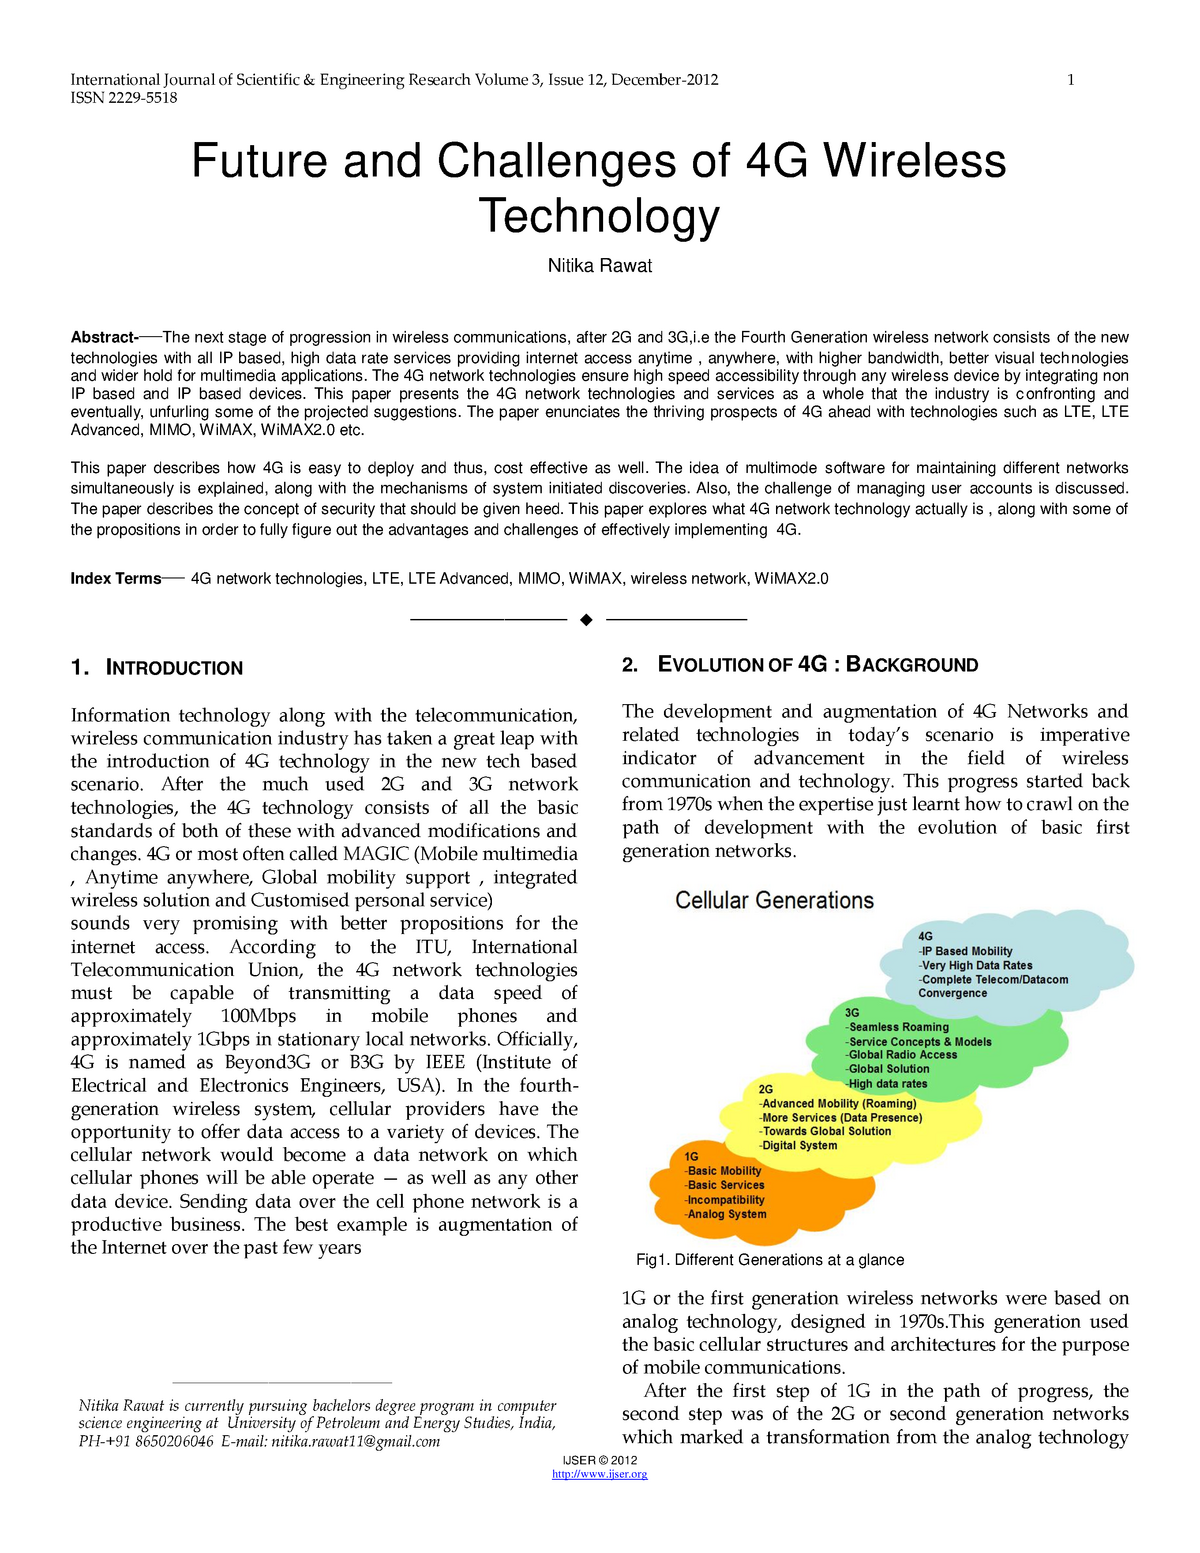 5g wireless technology research paper 2020